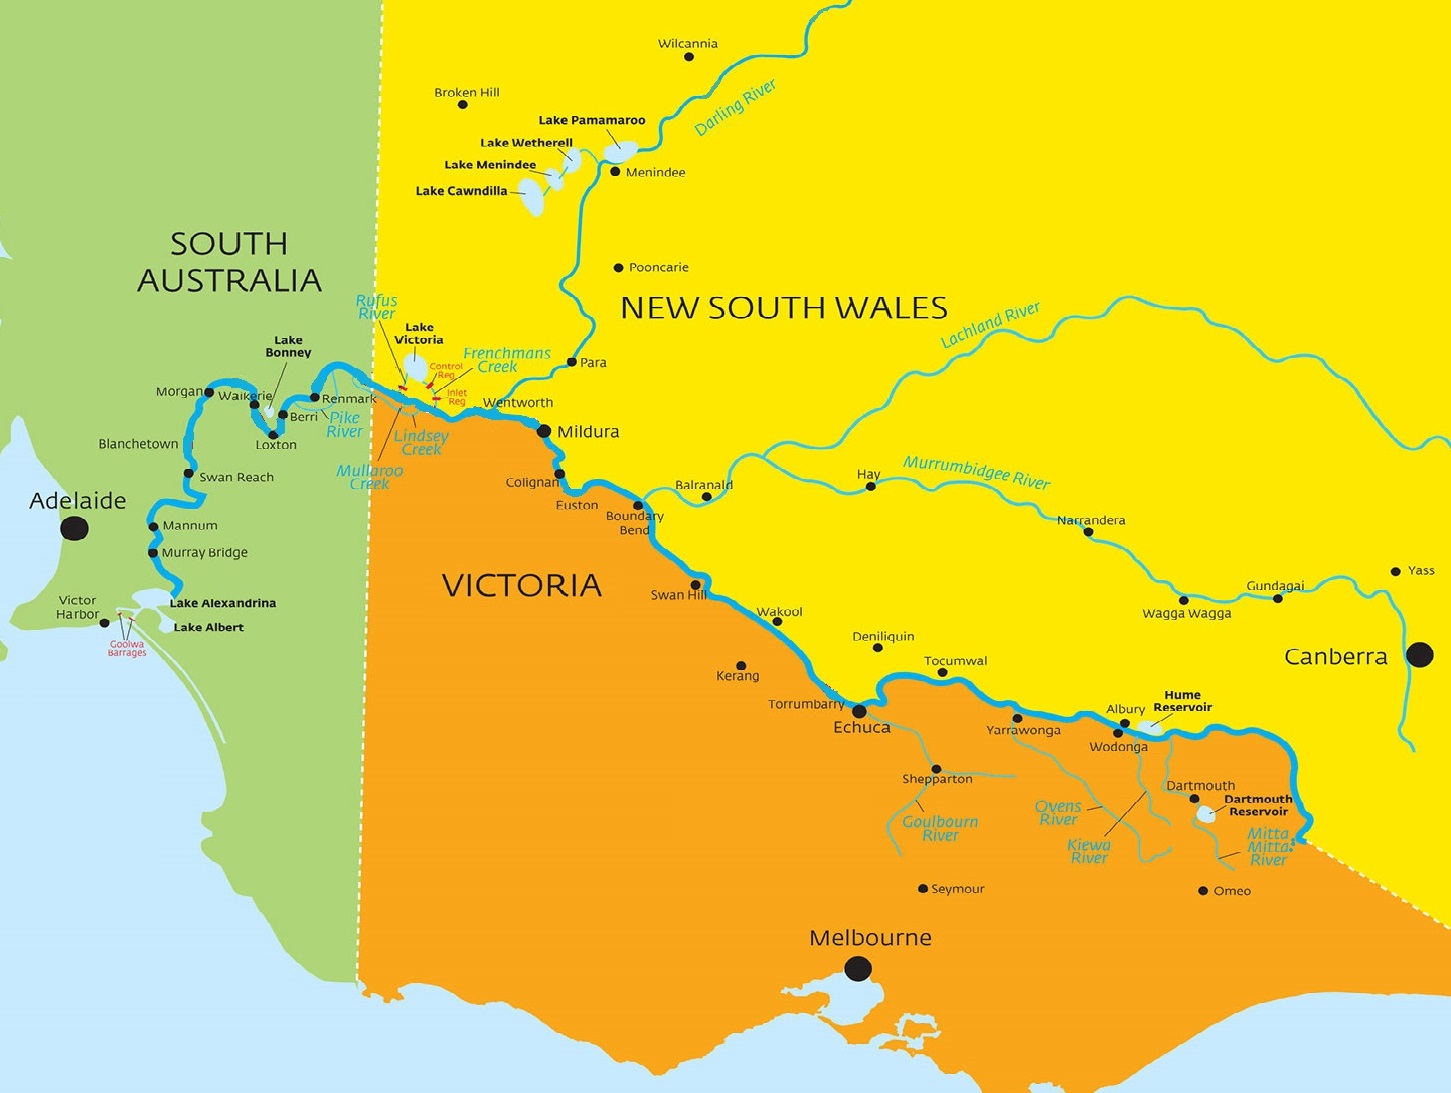 The mighty Murray River spans three states. Image adapted from SA WATER online map.